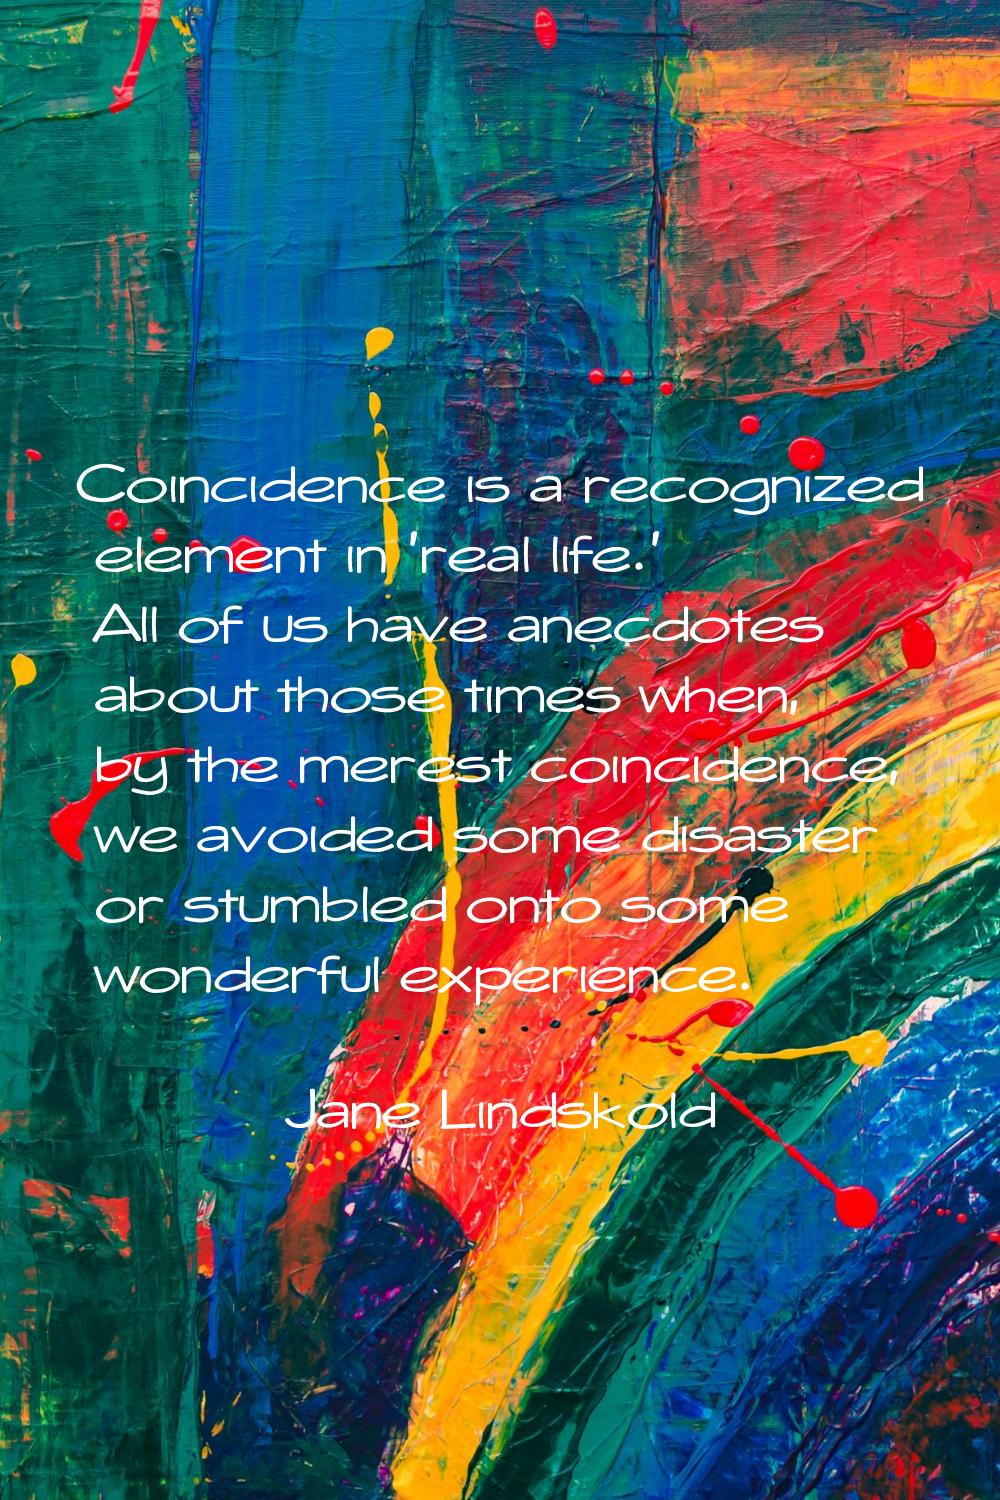 Coincidence is a recognized element in 'real life.' All of us have anecdotes about those times when